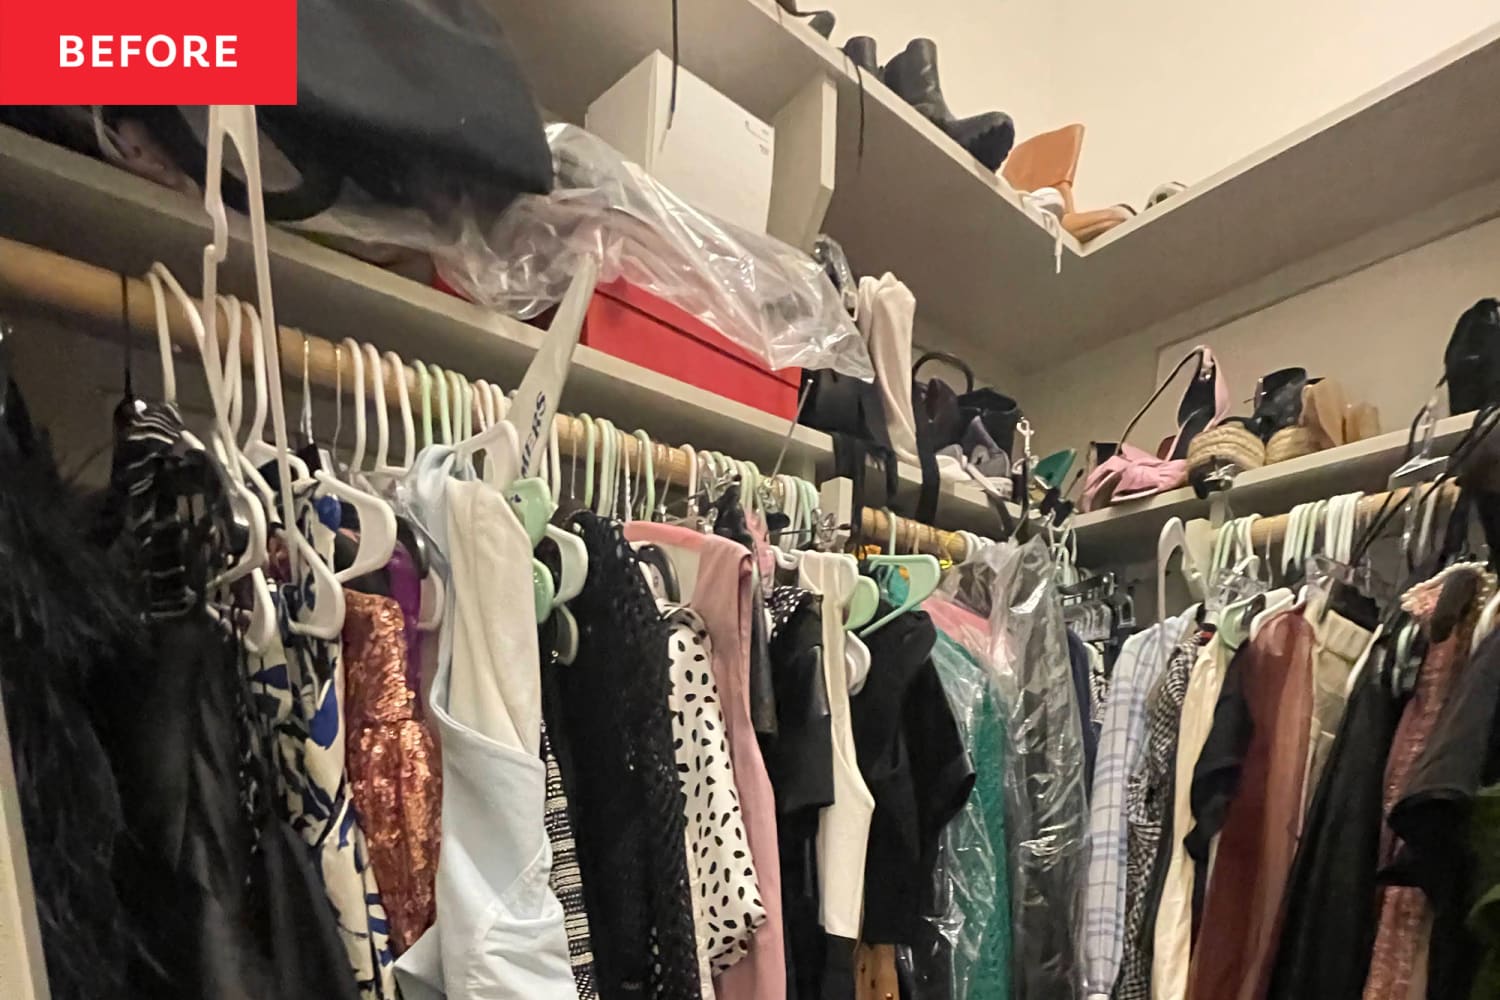 This Messy Primary Bedroom Closet Went from Overflowing to Organized